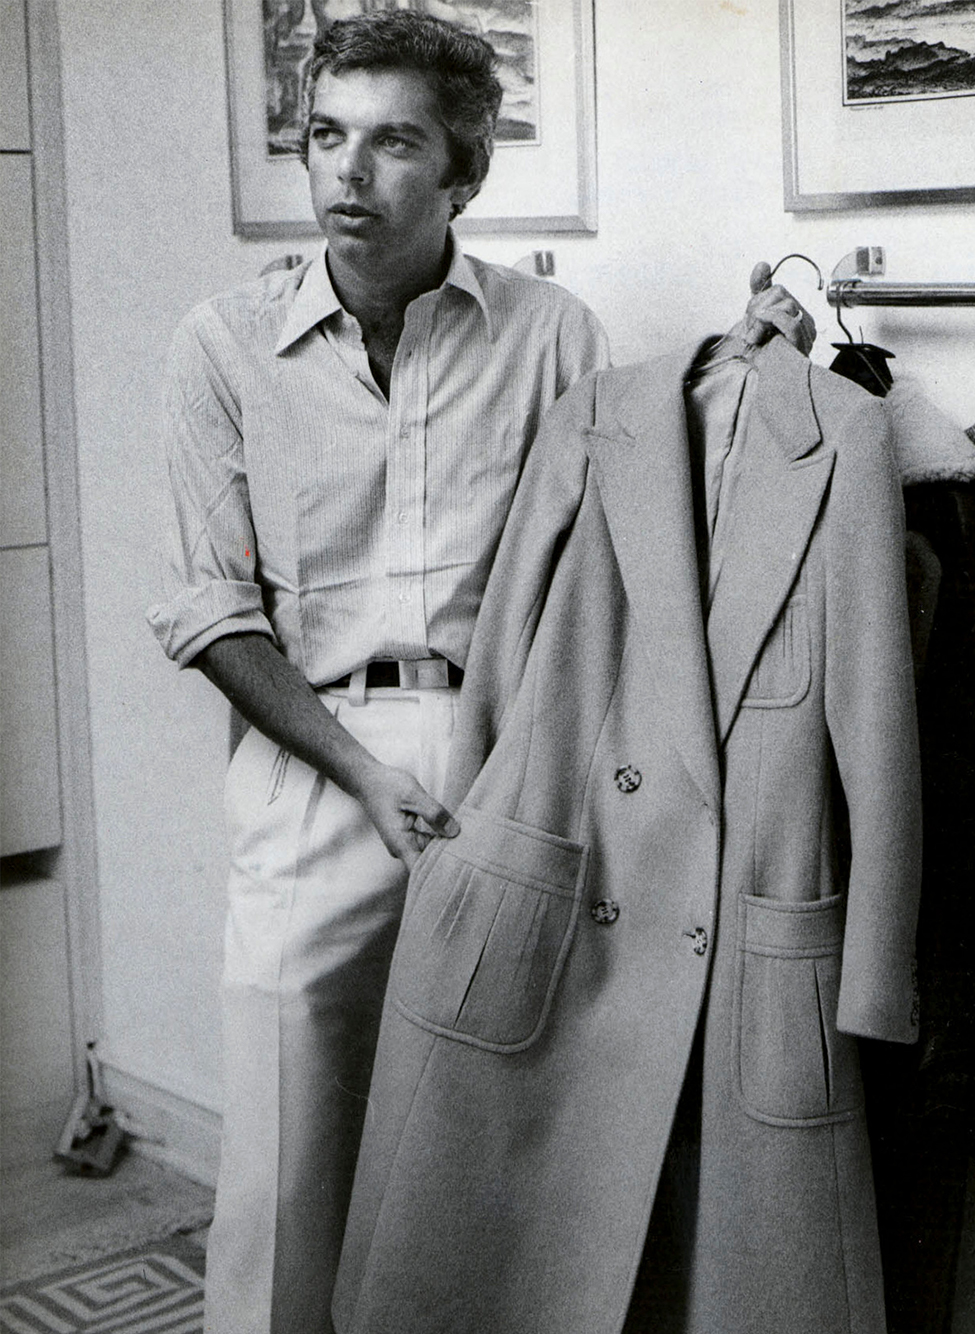 Ralph Lauren in the ’70s with his iconic polo coat, which was to become one of the brand’s signature classics